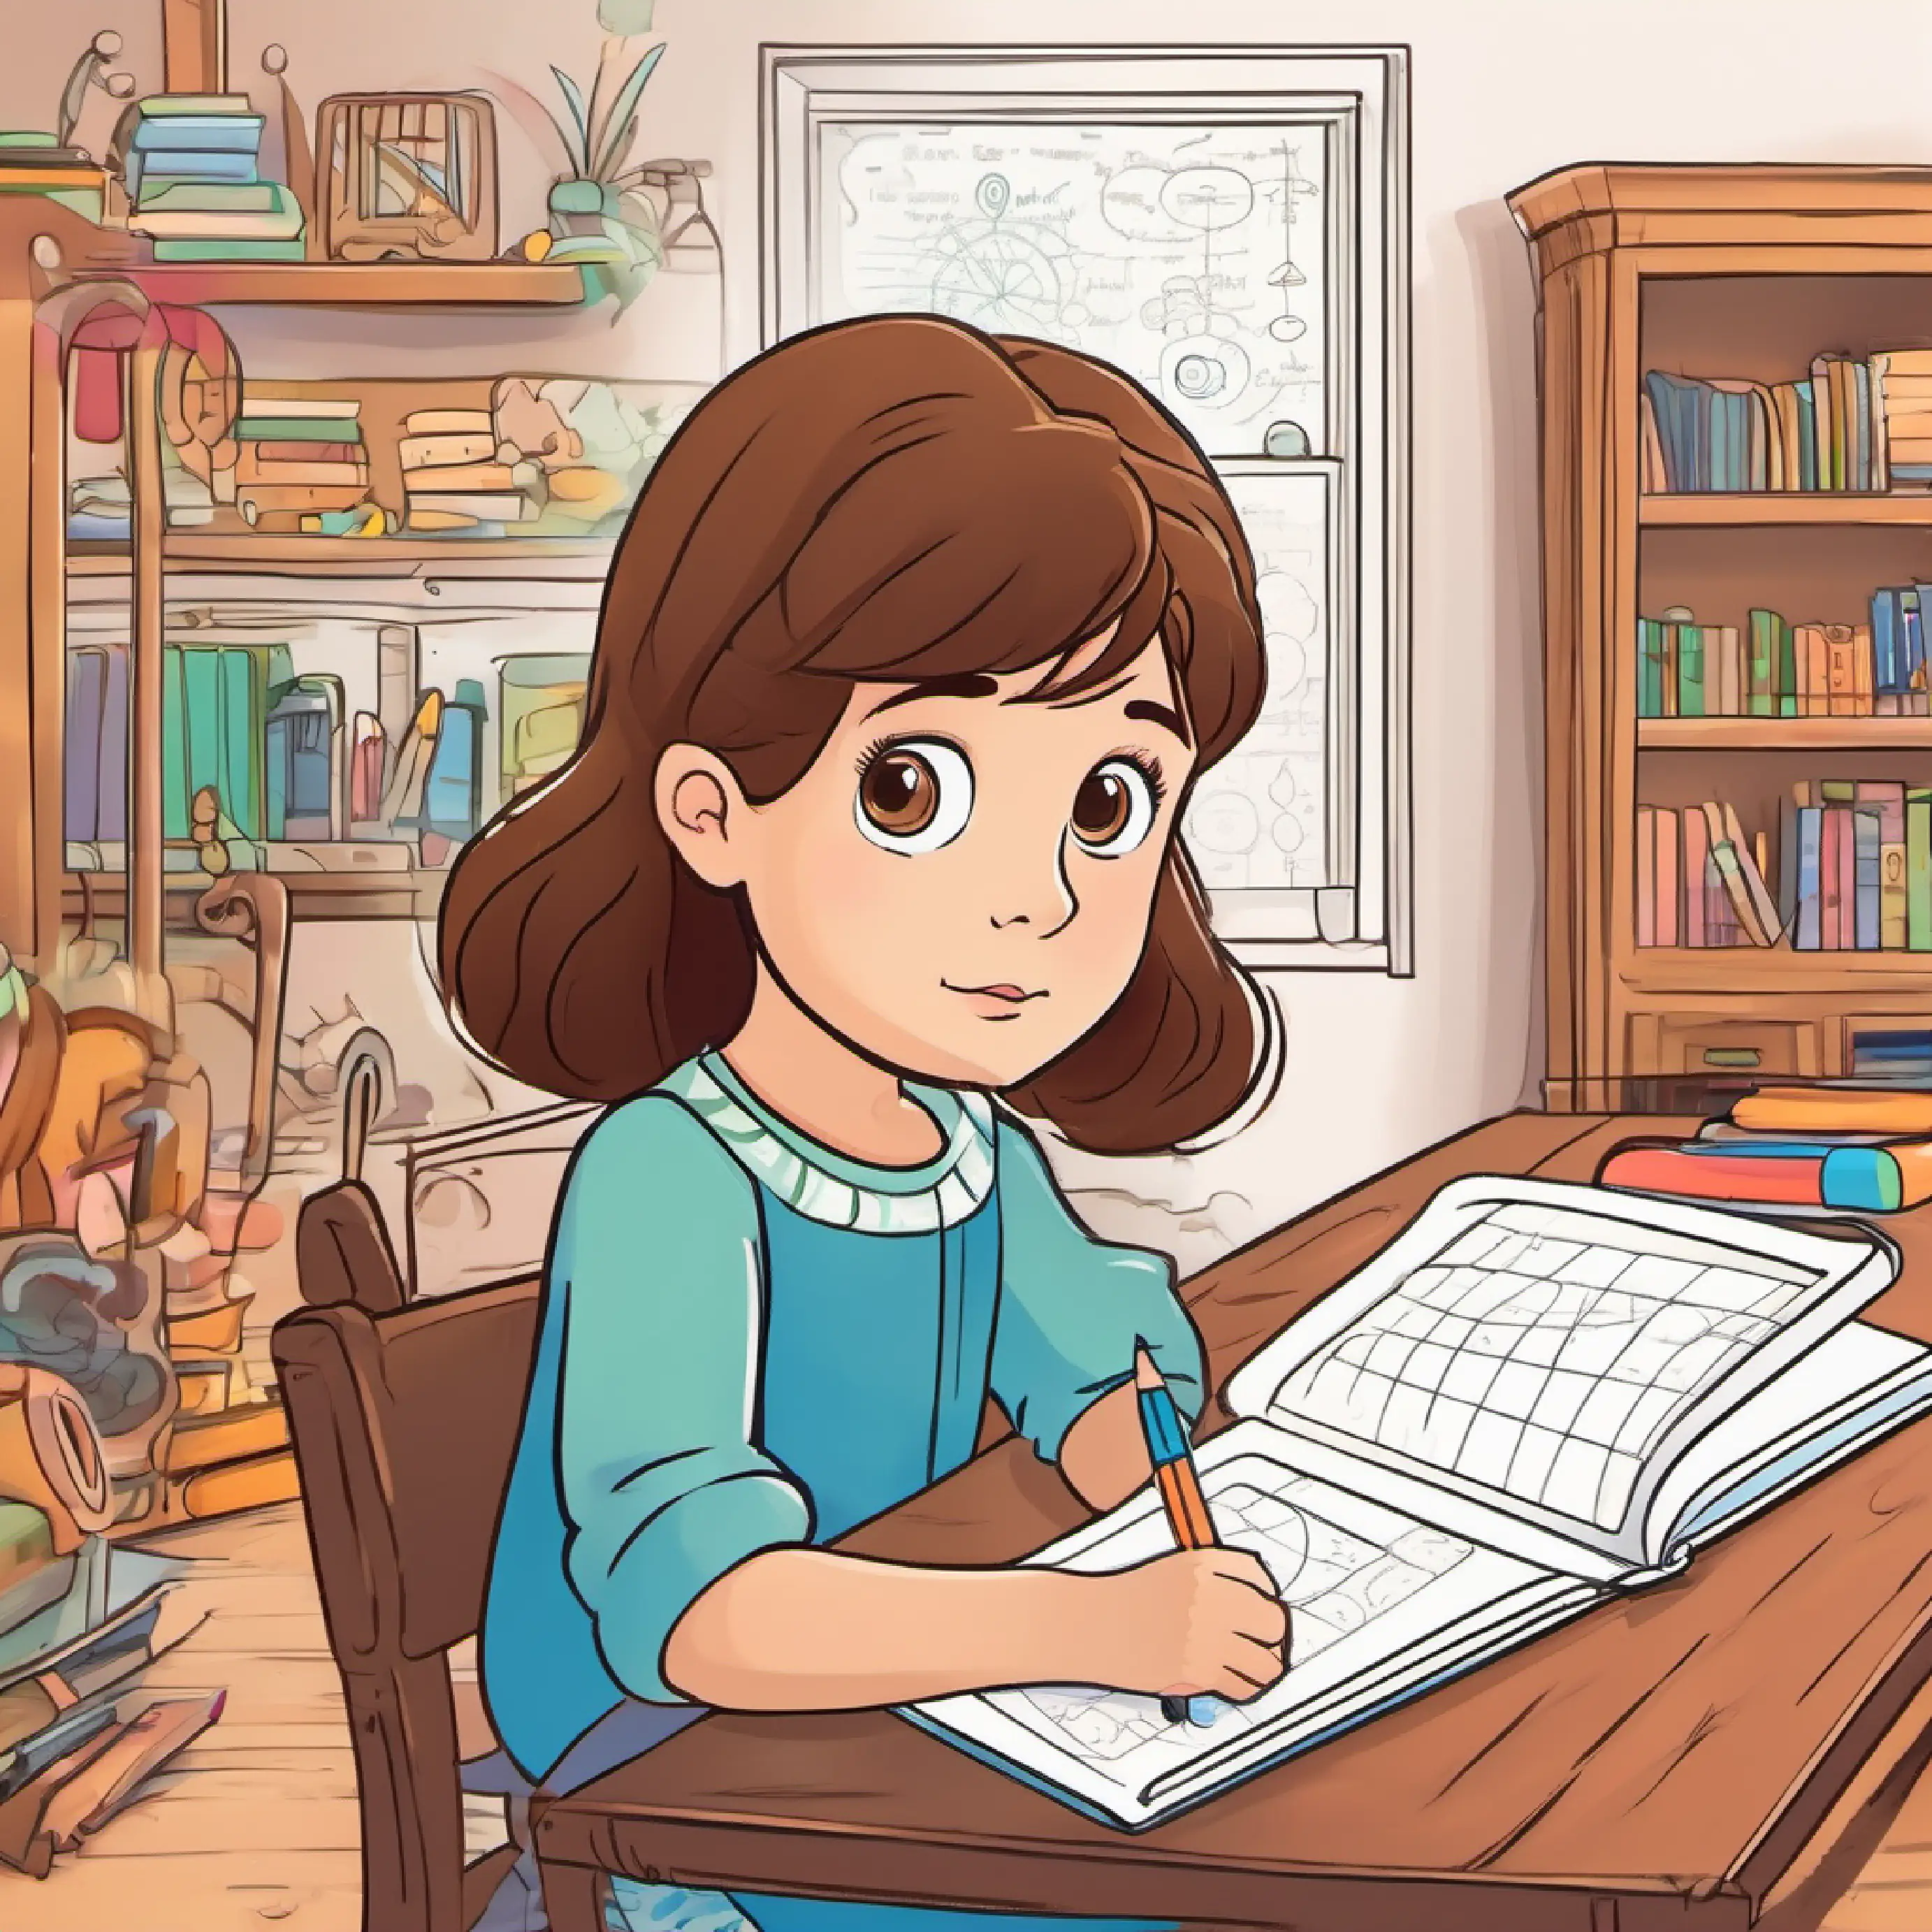 Curious girl with brown hair and hazel eyes at home, confused with math workbook